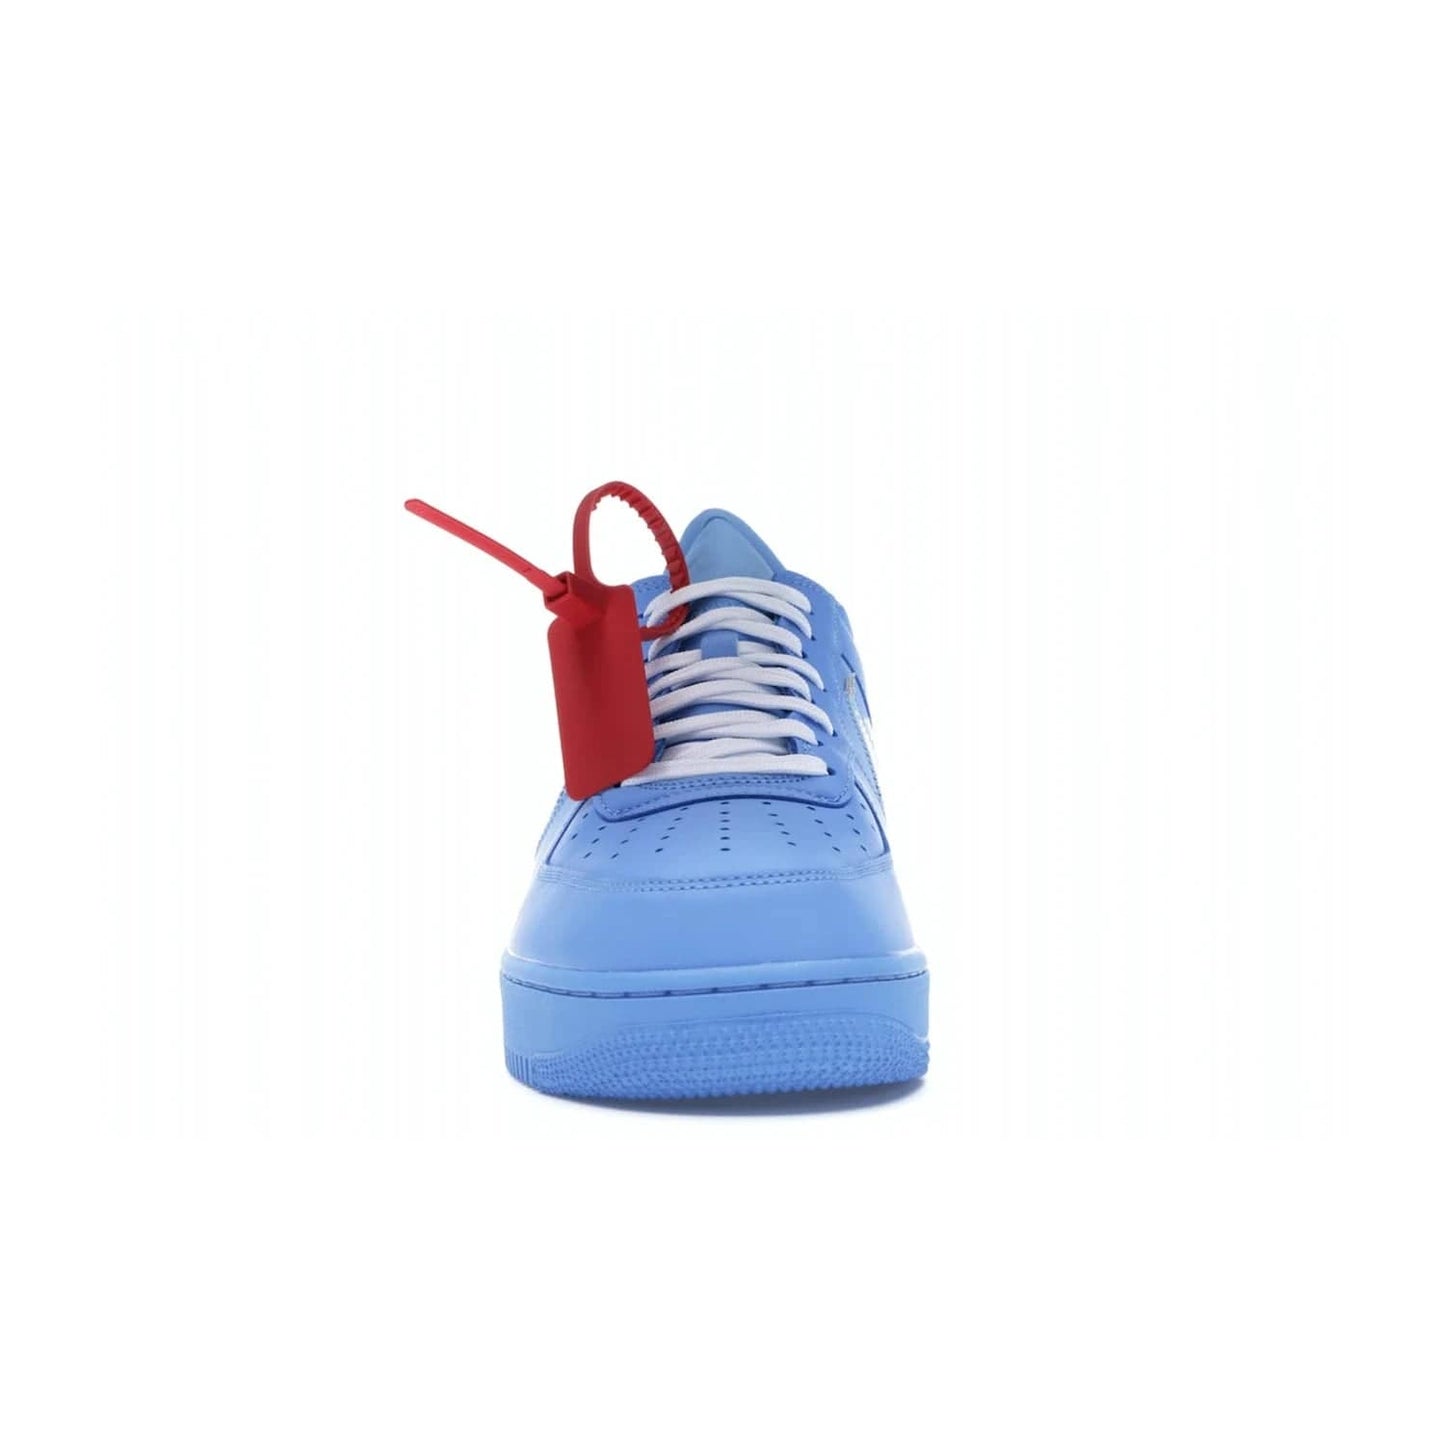 Nike Air Force 1 Low Off-White MCA University Blue - Image 10 - Only at www.BallersClubKickz.com - Virgil Abloh's Air Force 1 Low Off-White MCA University Blue: Features University Blue leather and midsole, reflective silver Nike Swoosh, red zip tie, white laces, and iconic Off-White™ branding. A must-have for any Virgil Abloh enthusiast.